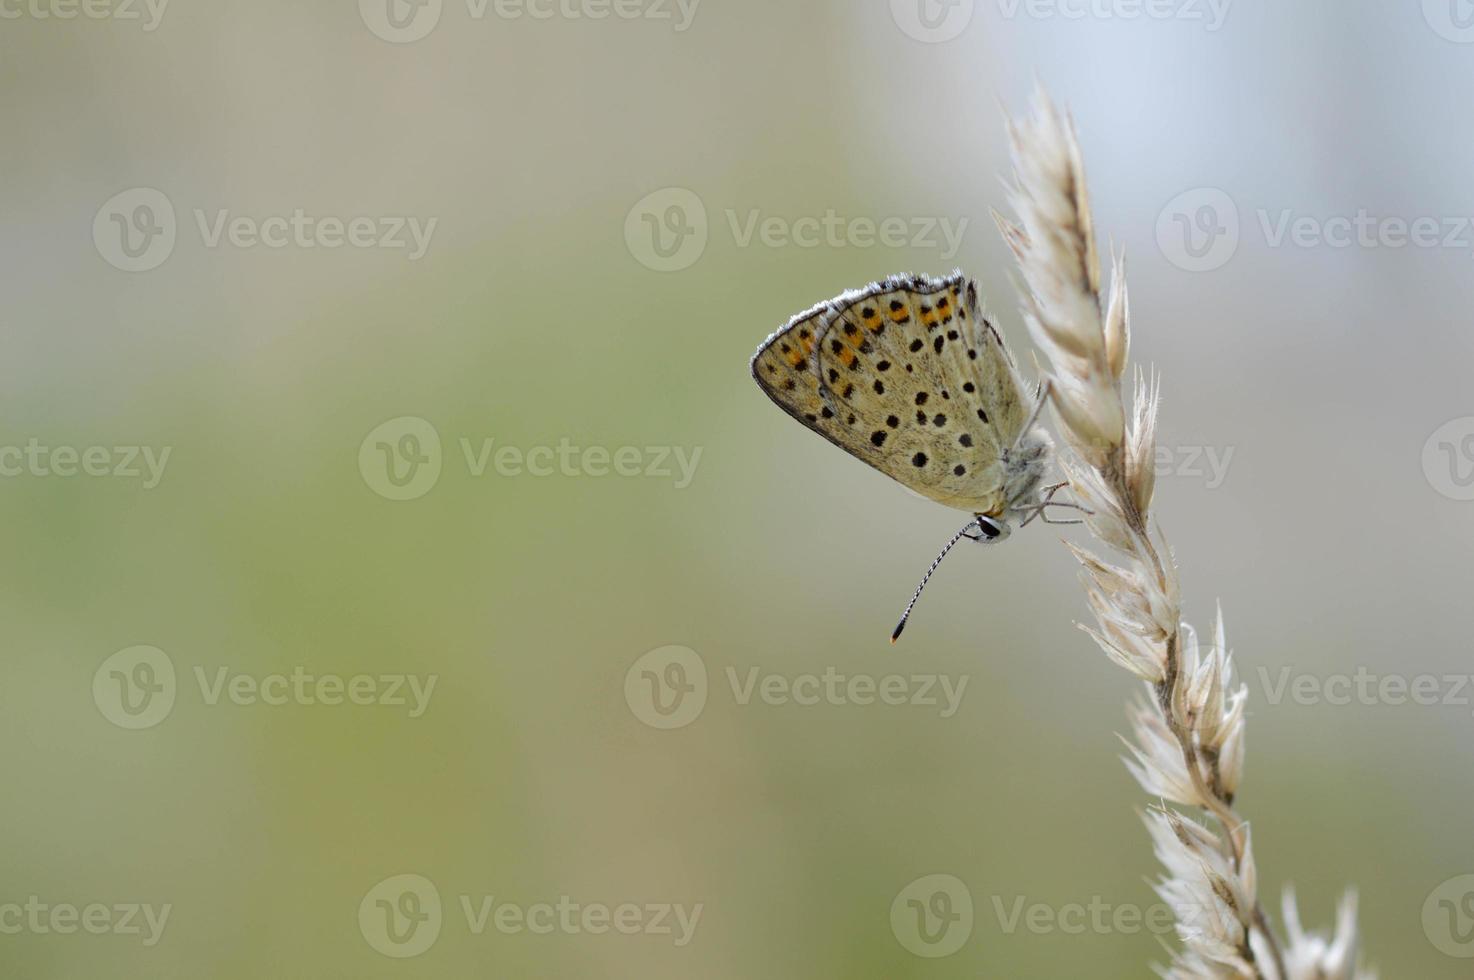 Polyommatus icarus, common blue butterfly, macro in nature photo